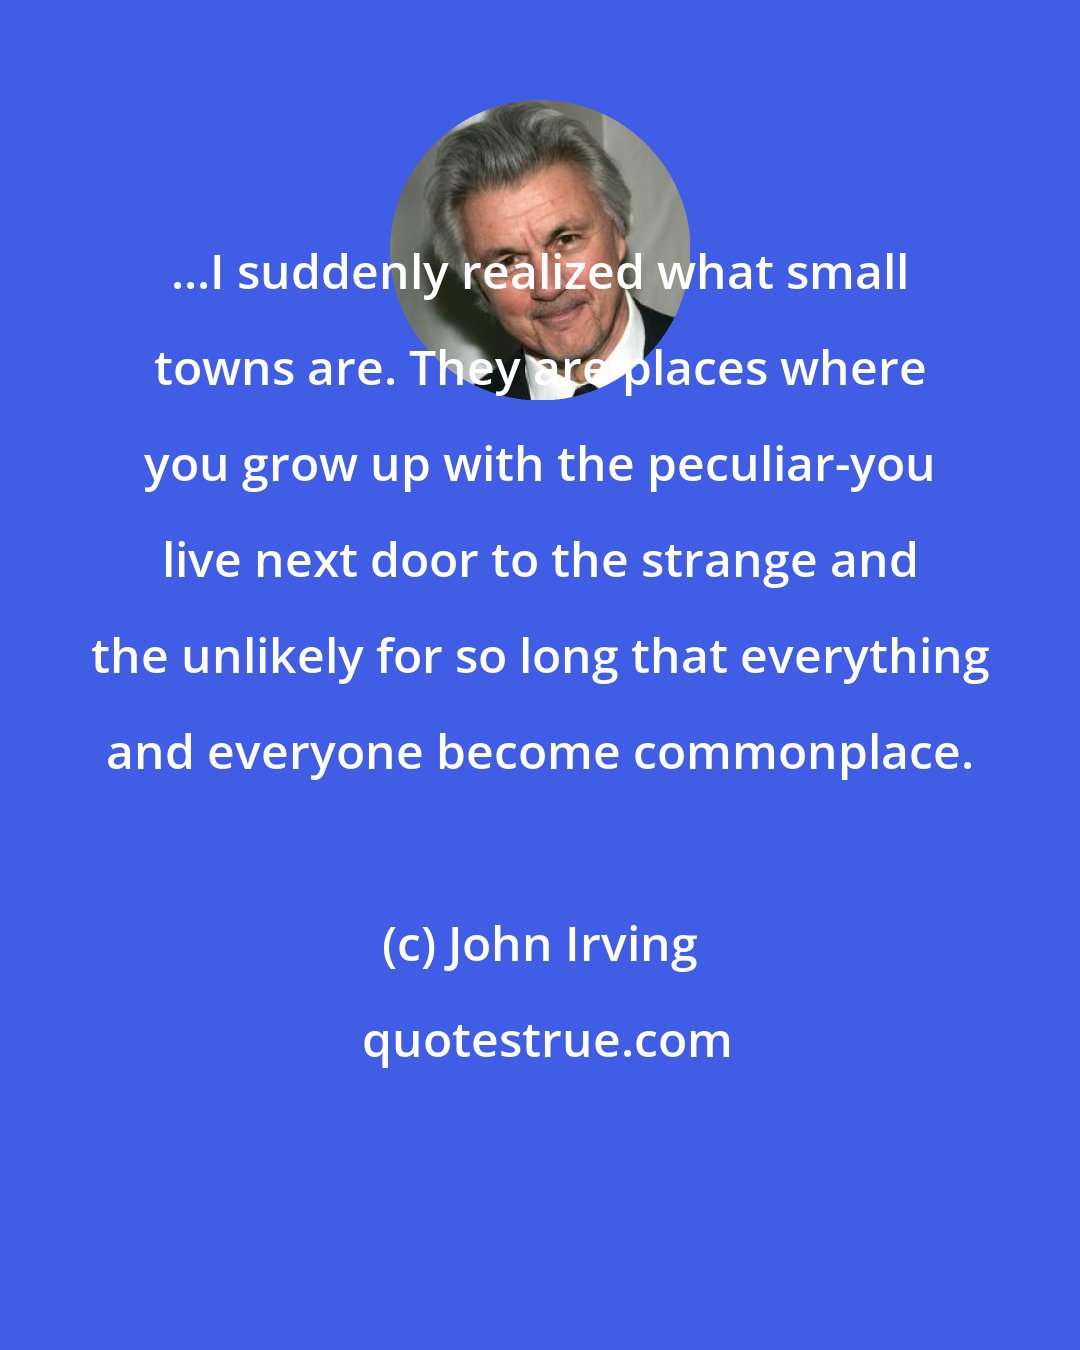 John Irving: ...I suddenly realized what small towns are. They are places where you grow up with the peculiar-you live next door to the strange and the unlikely for so long that everything and everyone become commonplace.